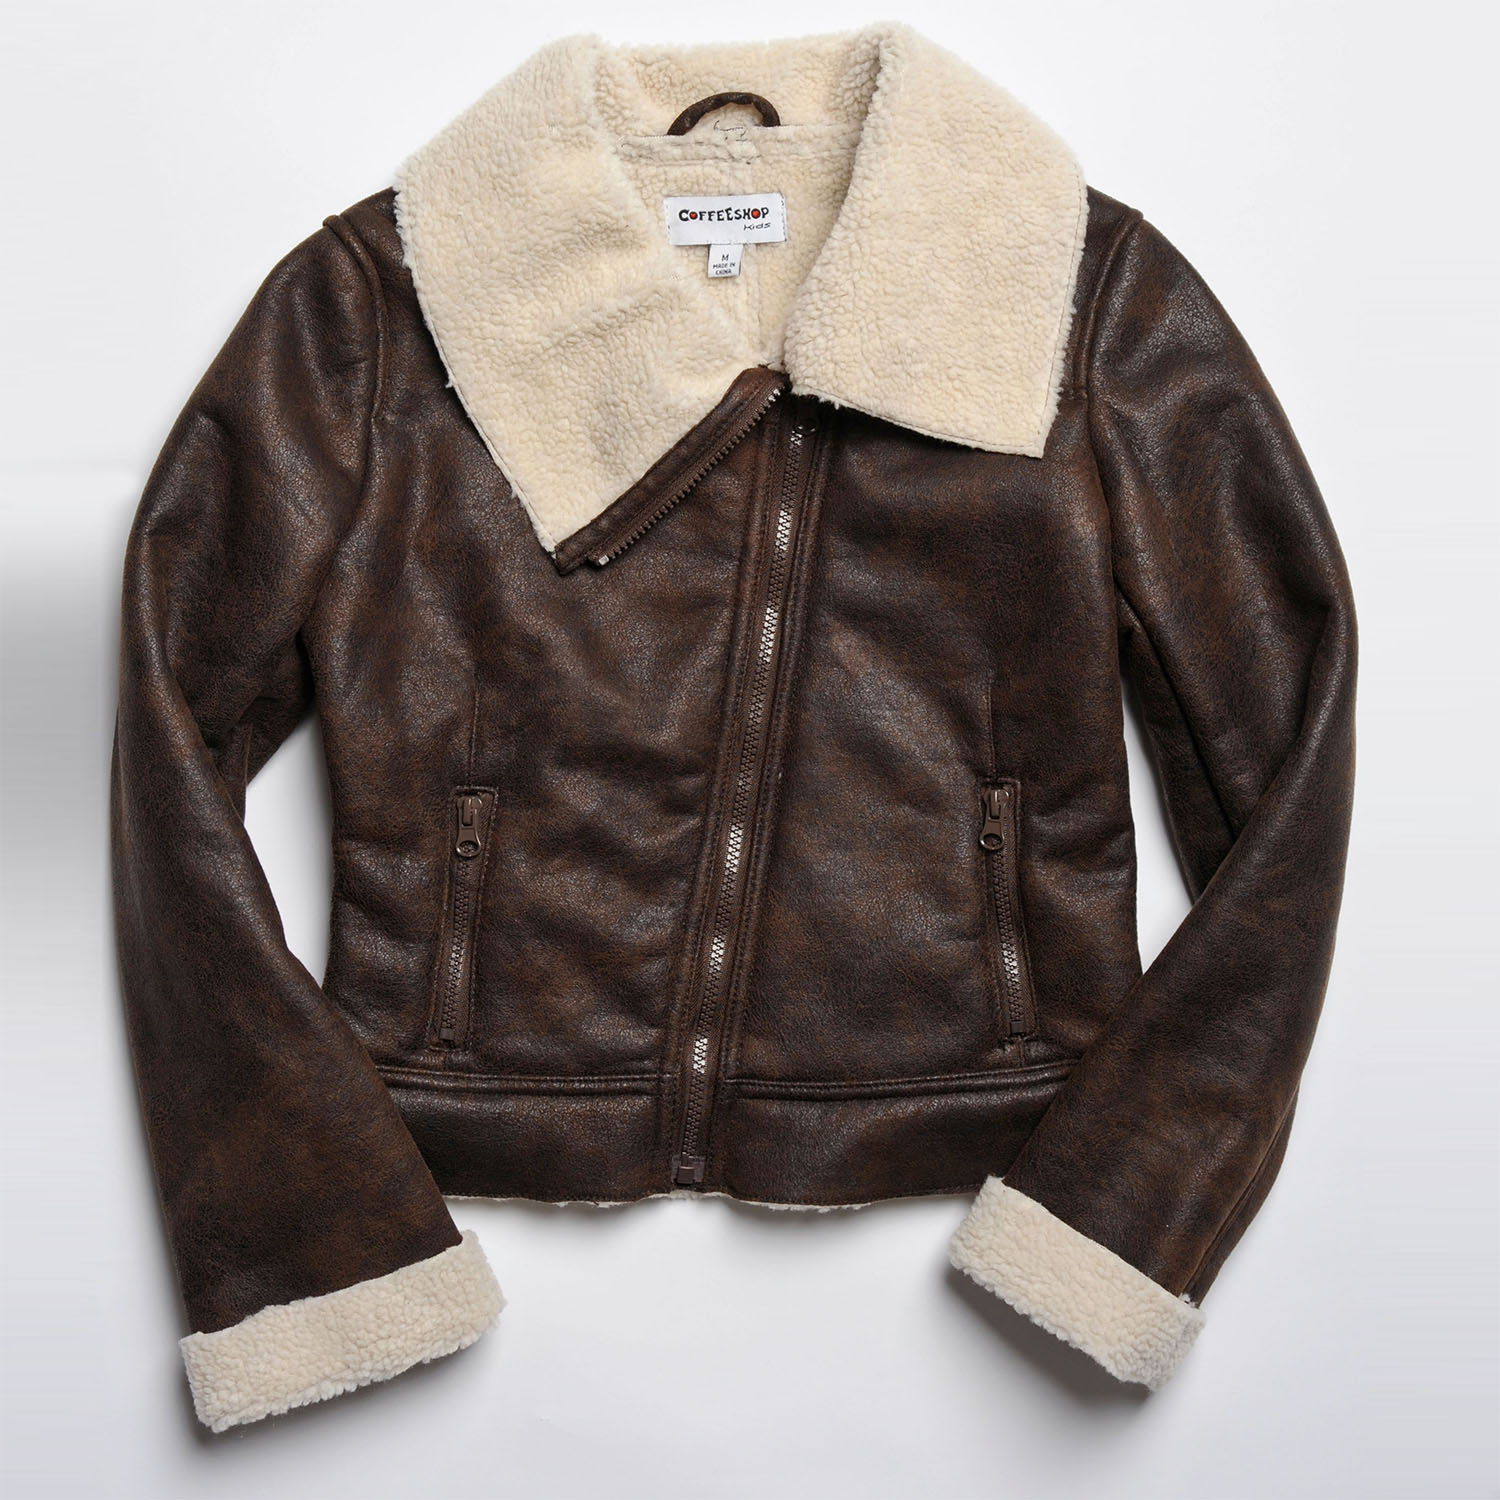 Coffeeshop Kids Girls Brown Faux Shearling Jacket (BrownFaux shearlingTwo (2) front zipper pocketsSpread collarLong sleeves with faux fur cuffsAsymmetrical front zipperZip up closureMeasurement Guide Childs Sizing GuideMaterials 70 percent acrylic/ 30 pe